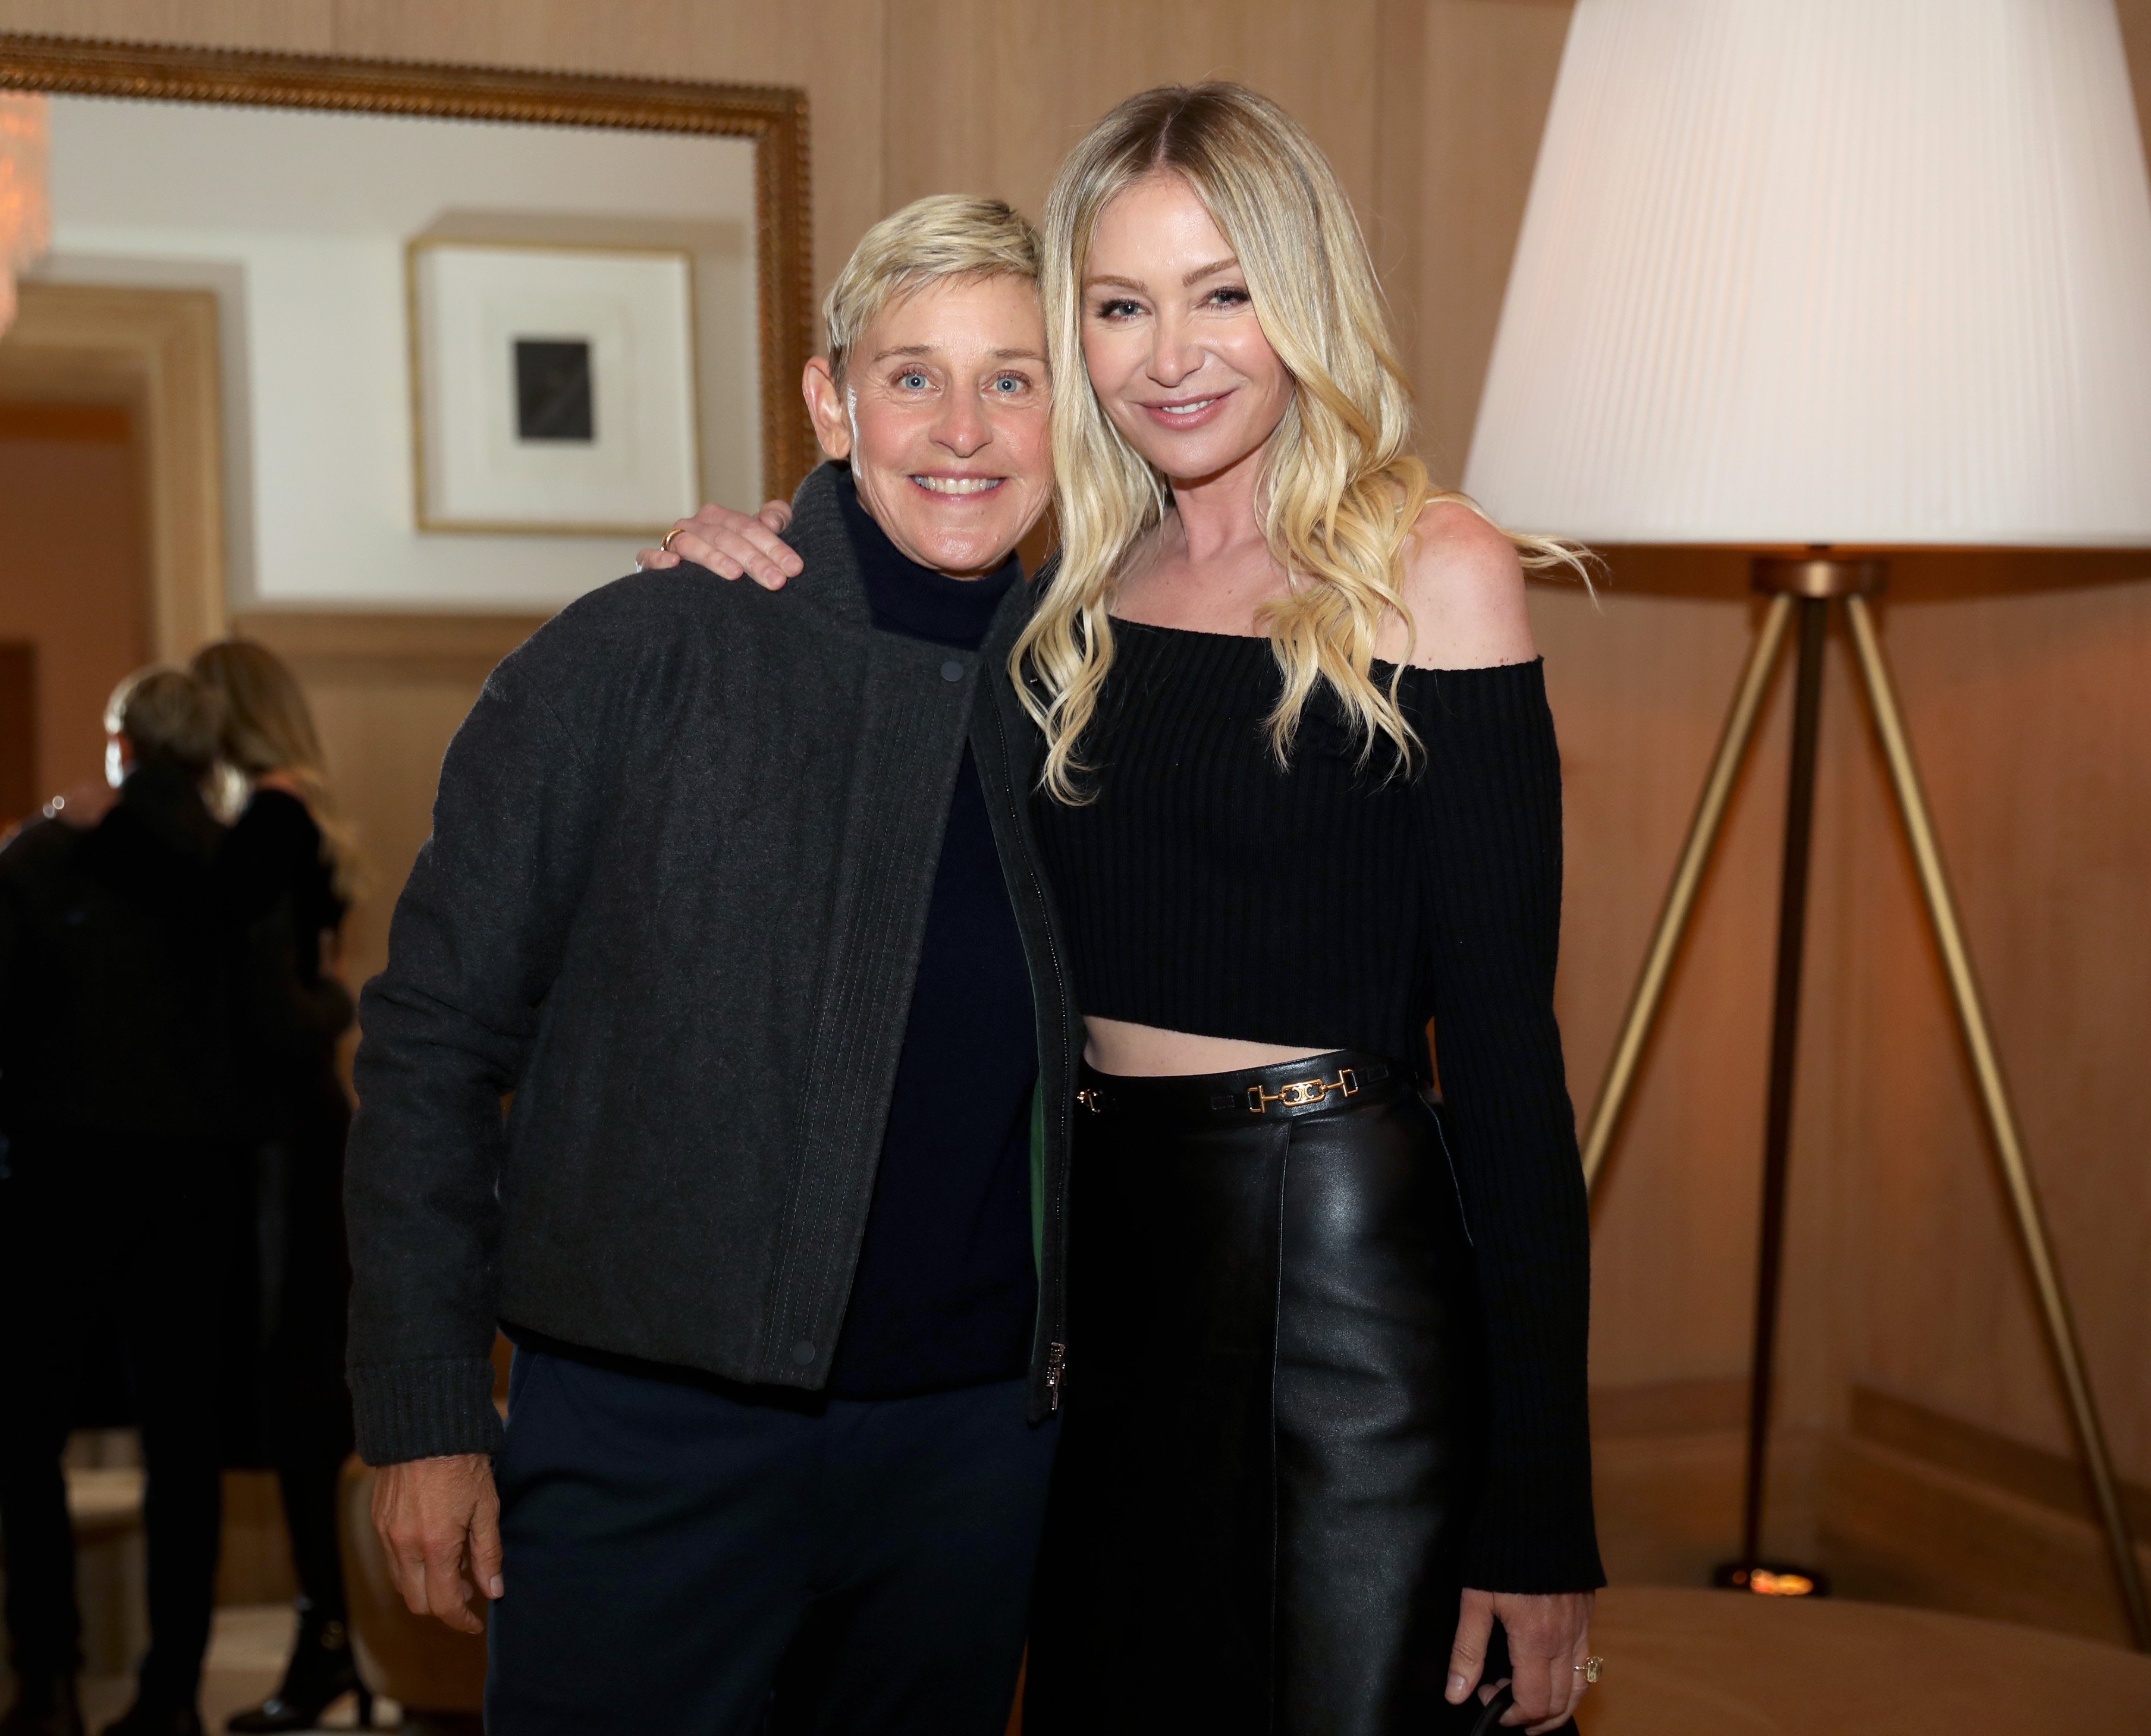 Ellen DeGeneres, who owns a few mansions with Portia de Rossi, pose for a photo together at an event in San Francisco